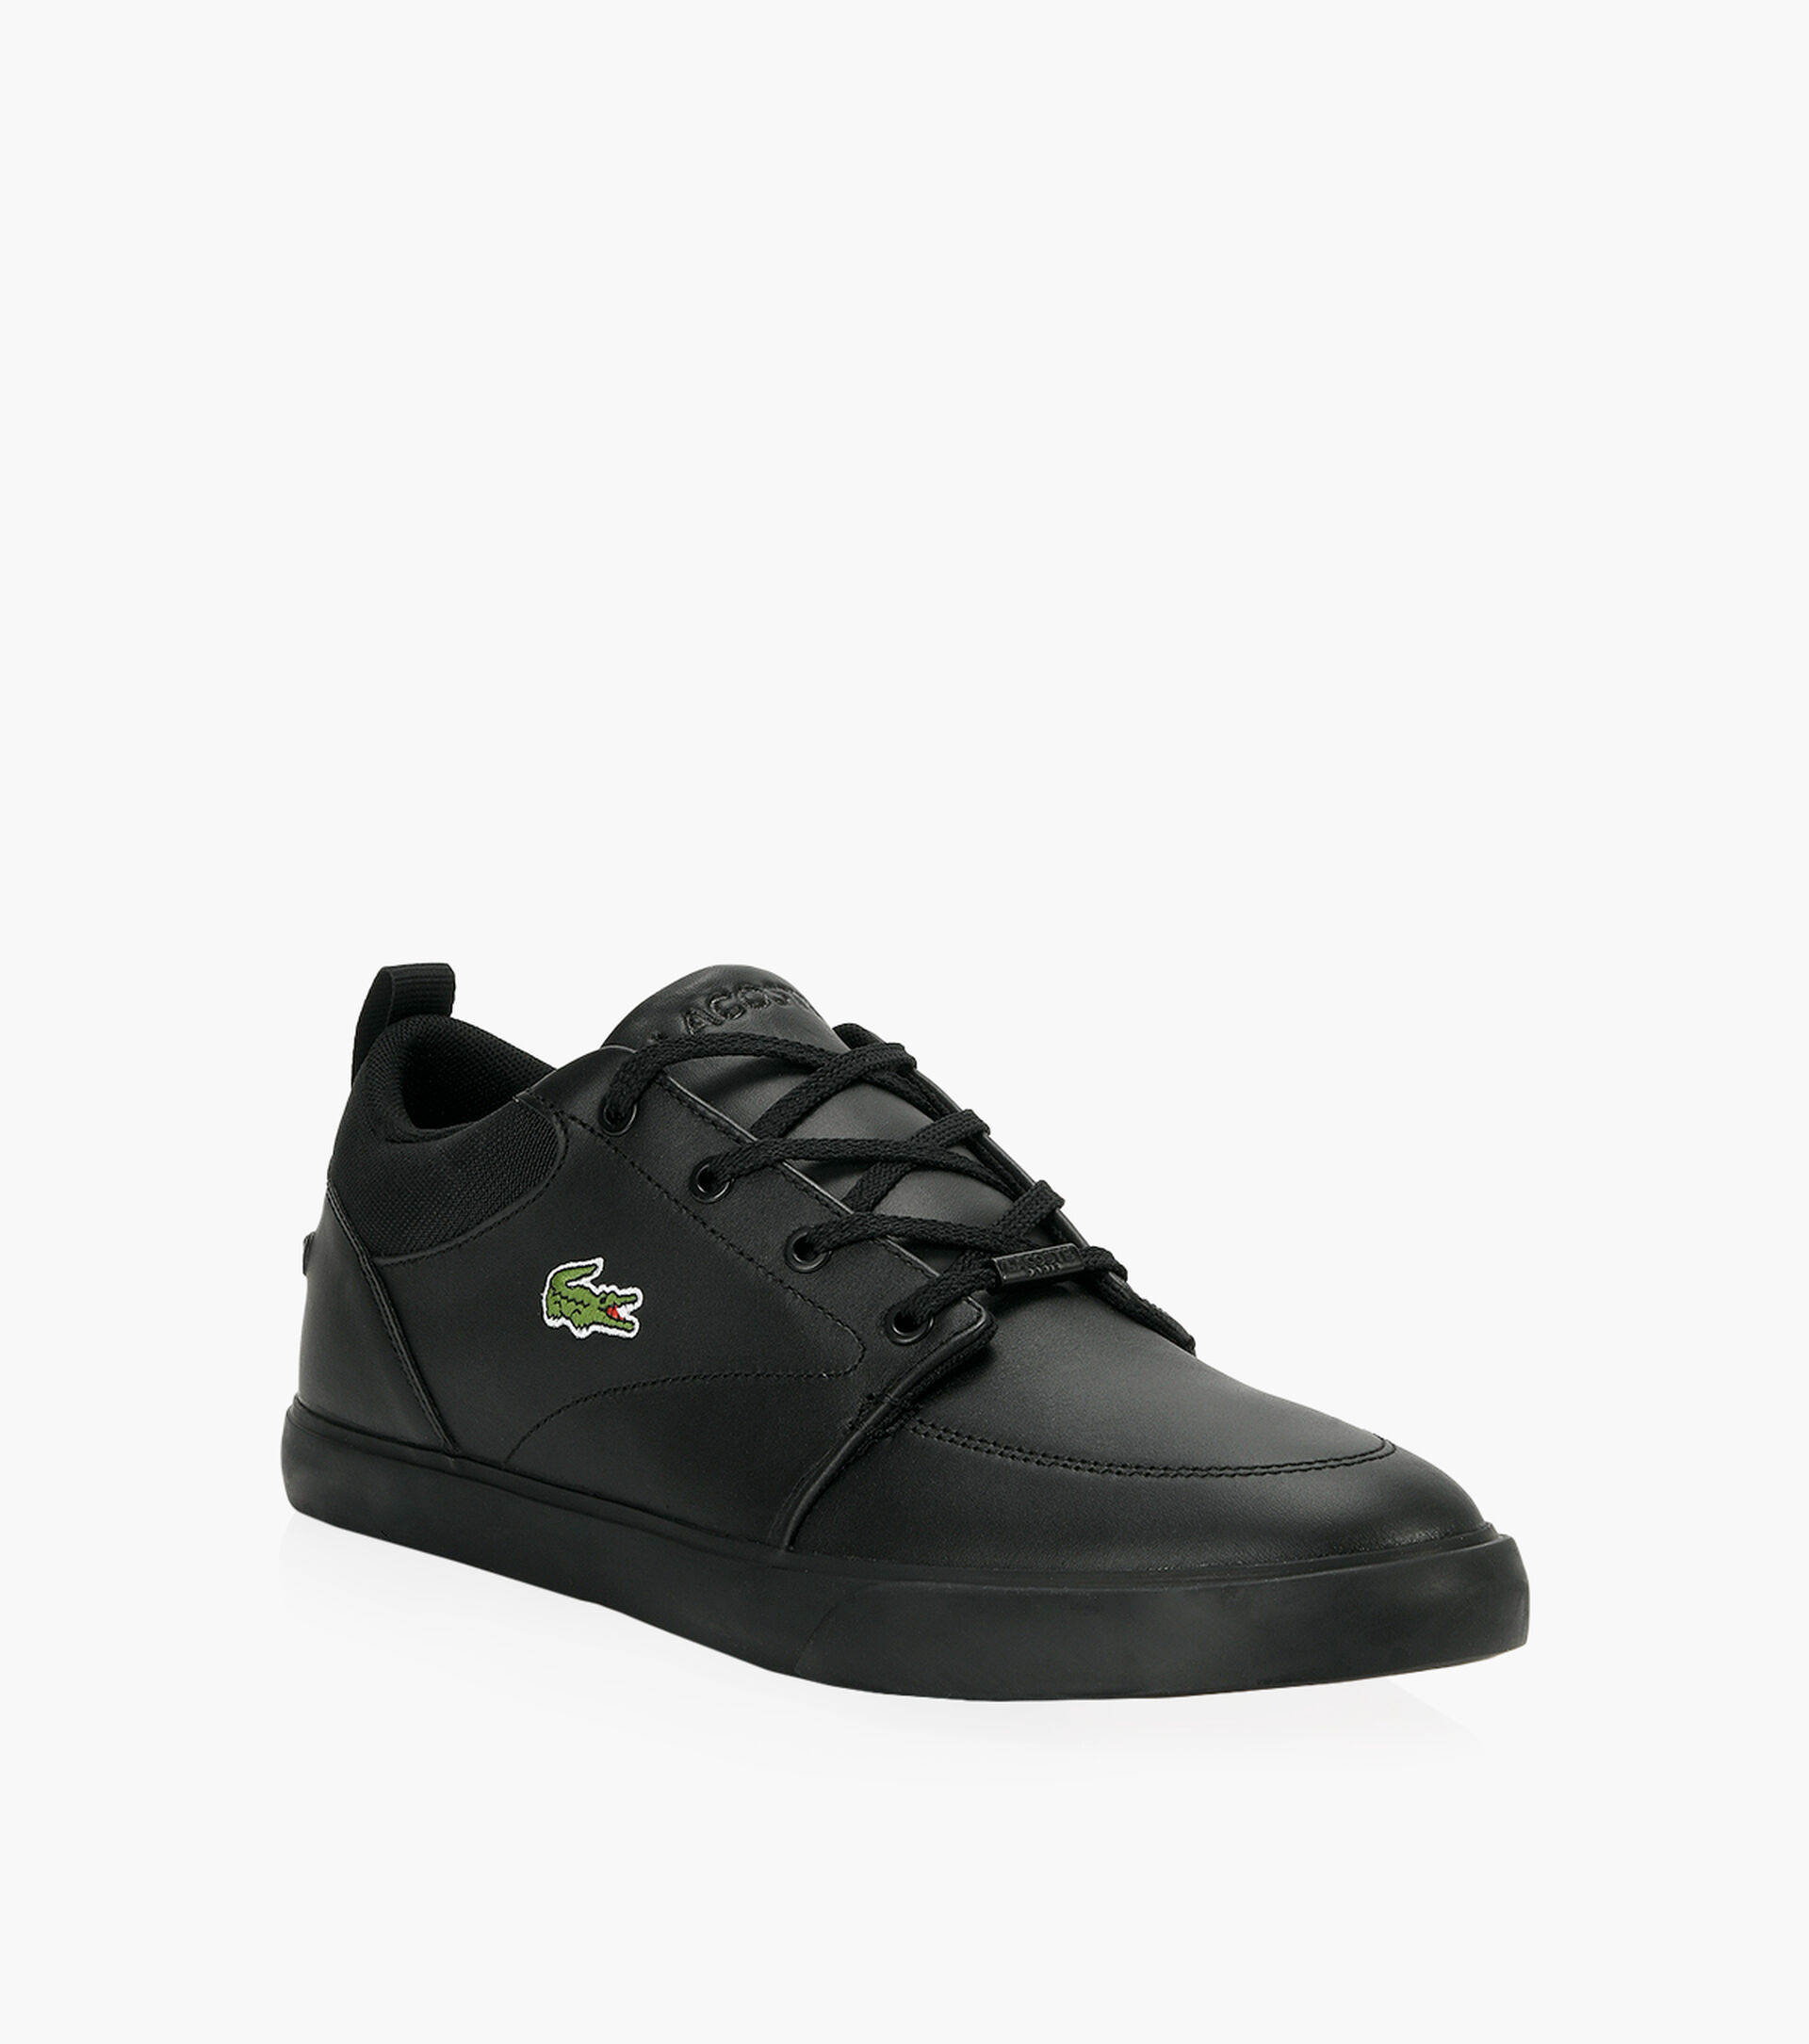 LACOSTE BAYLISS - Black Leather | Browns Shoes